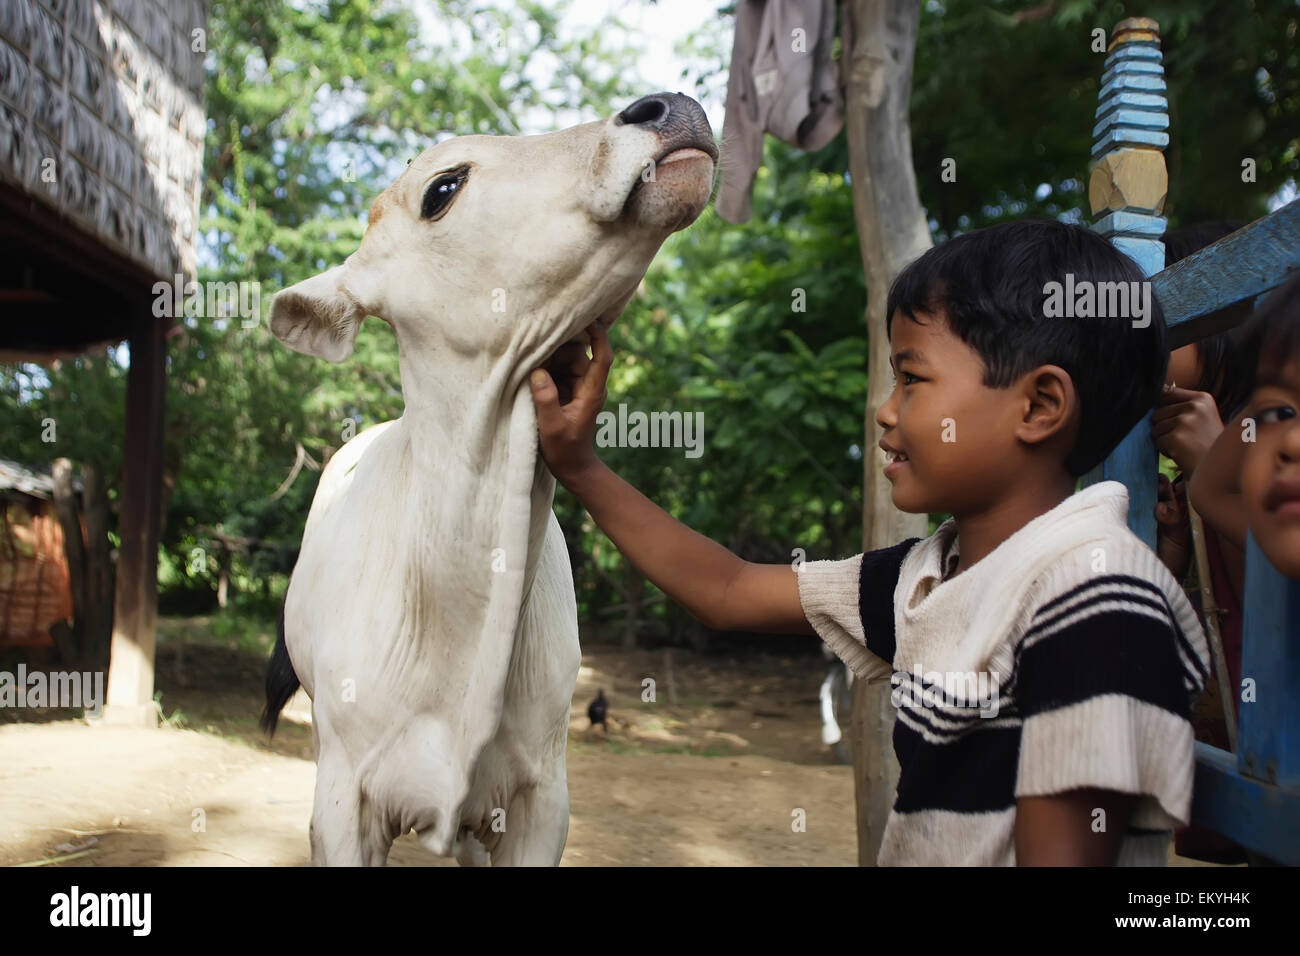 A boy caring for a cow with parasites; Kouk Duong Village, Battambang Province, Cambodia Stock Photo